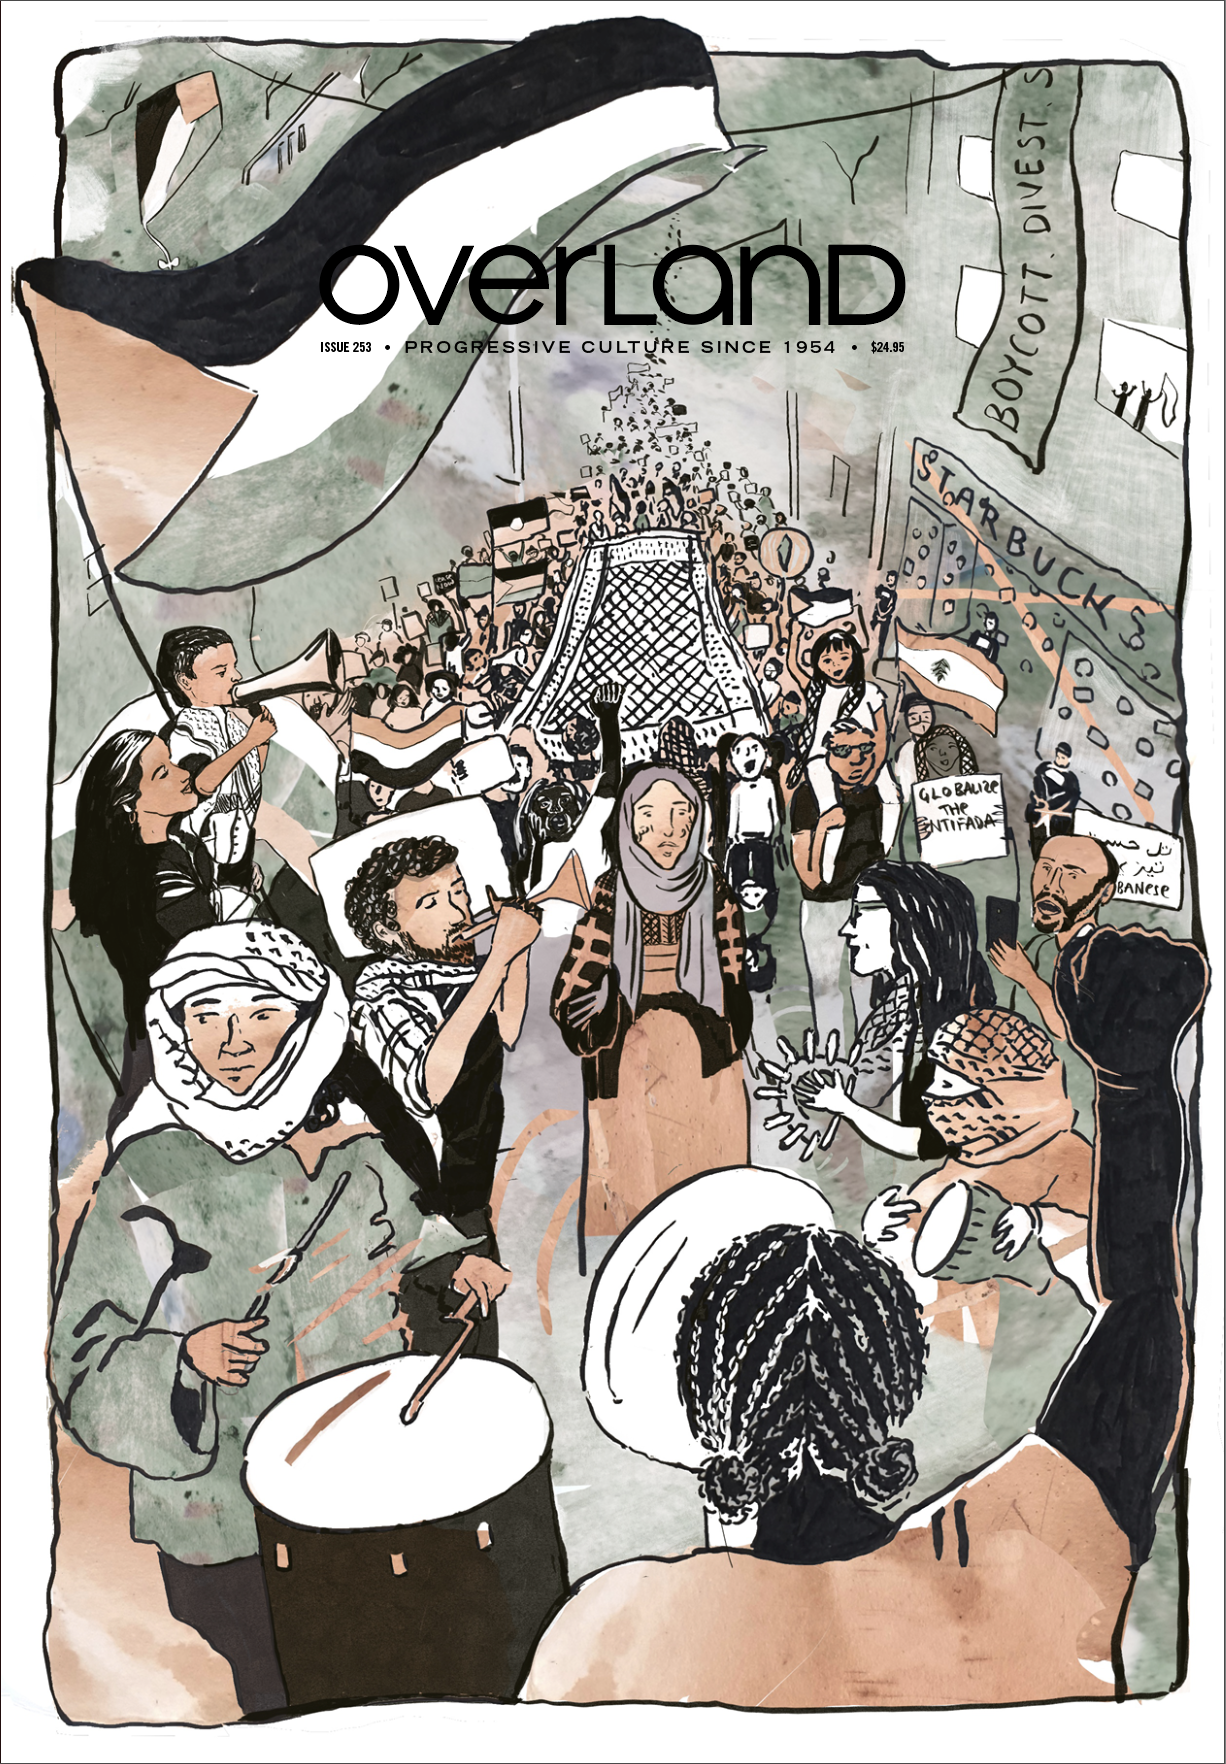 Overland Edition 253 cover showing solidarity with the Palestinian peoples.